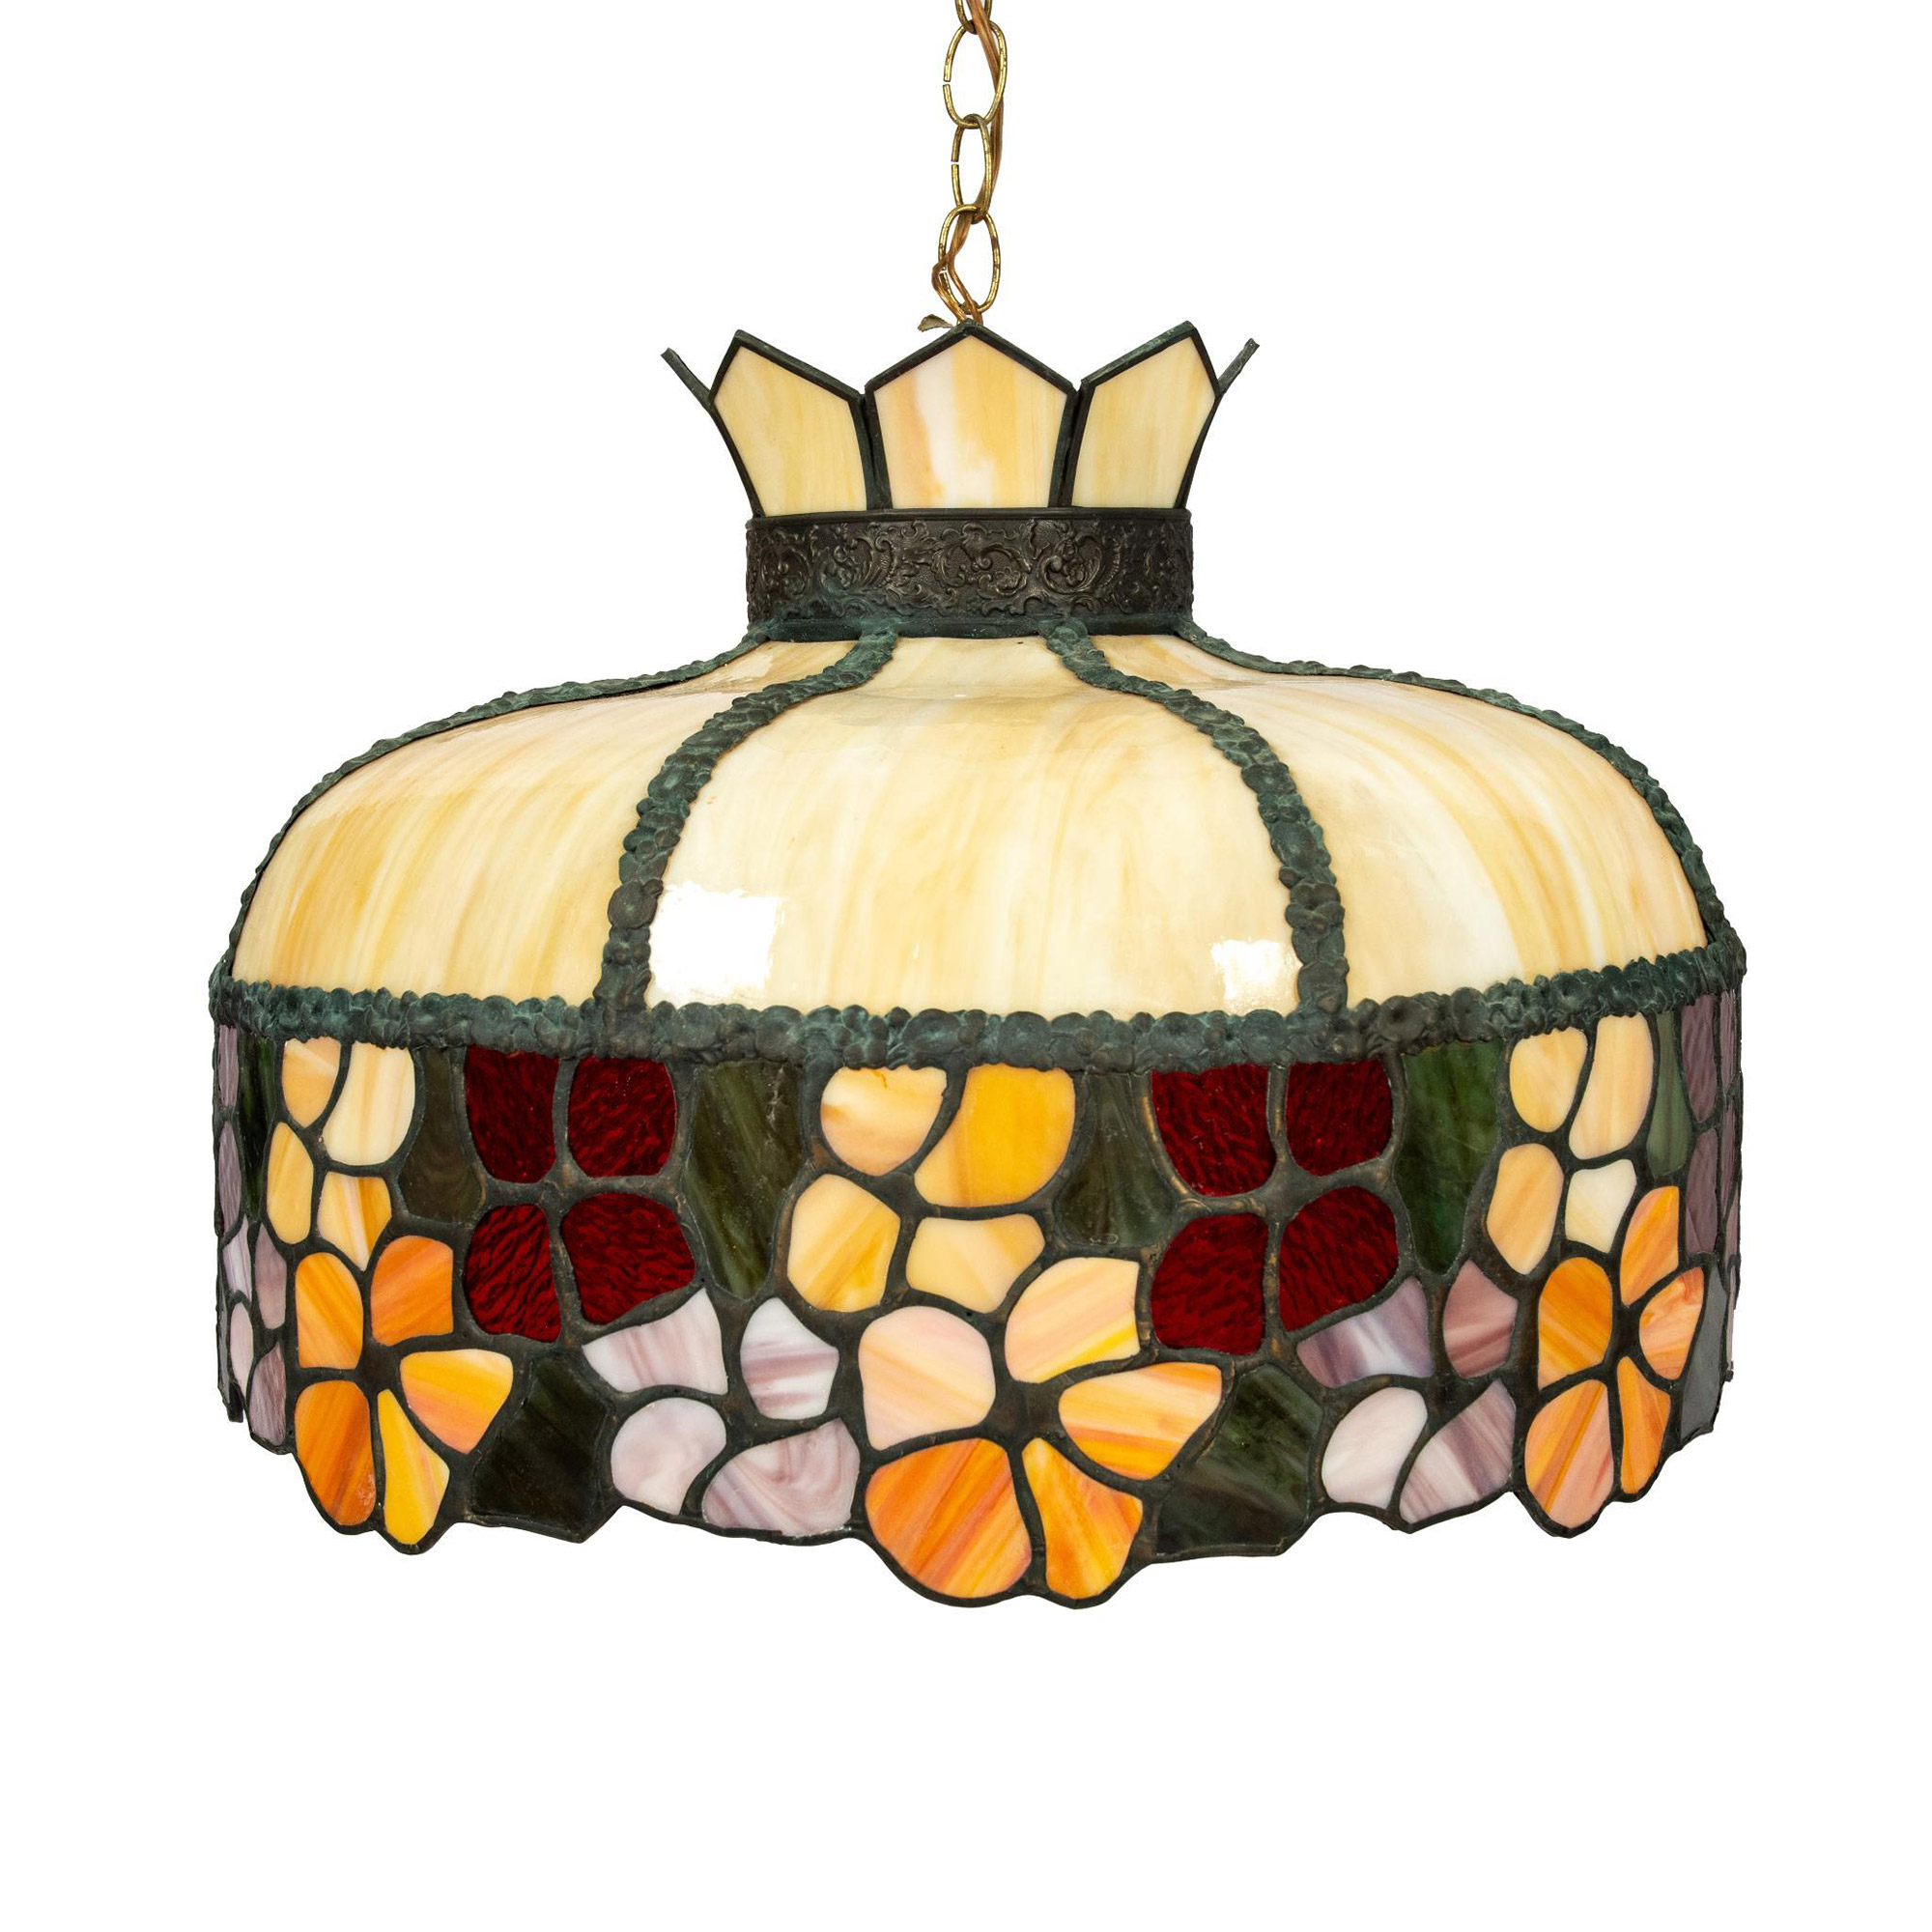 Tiffany Style Large Chandelier Leaded and Stained Glass - Image 4 of 6